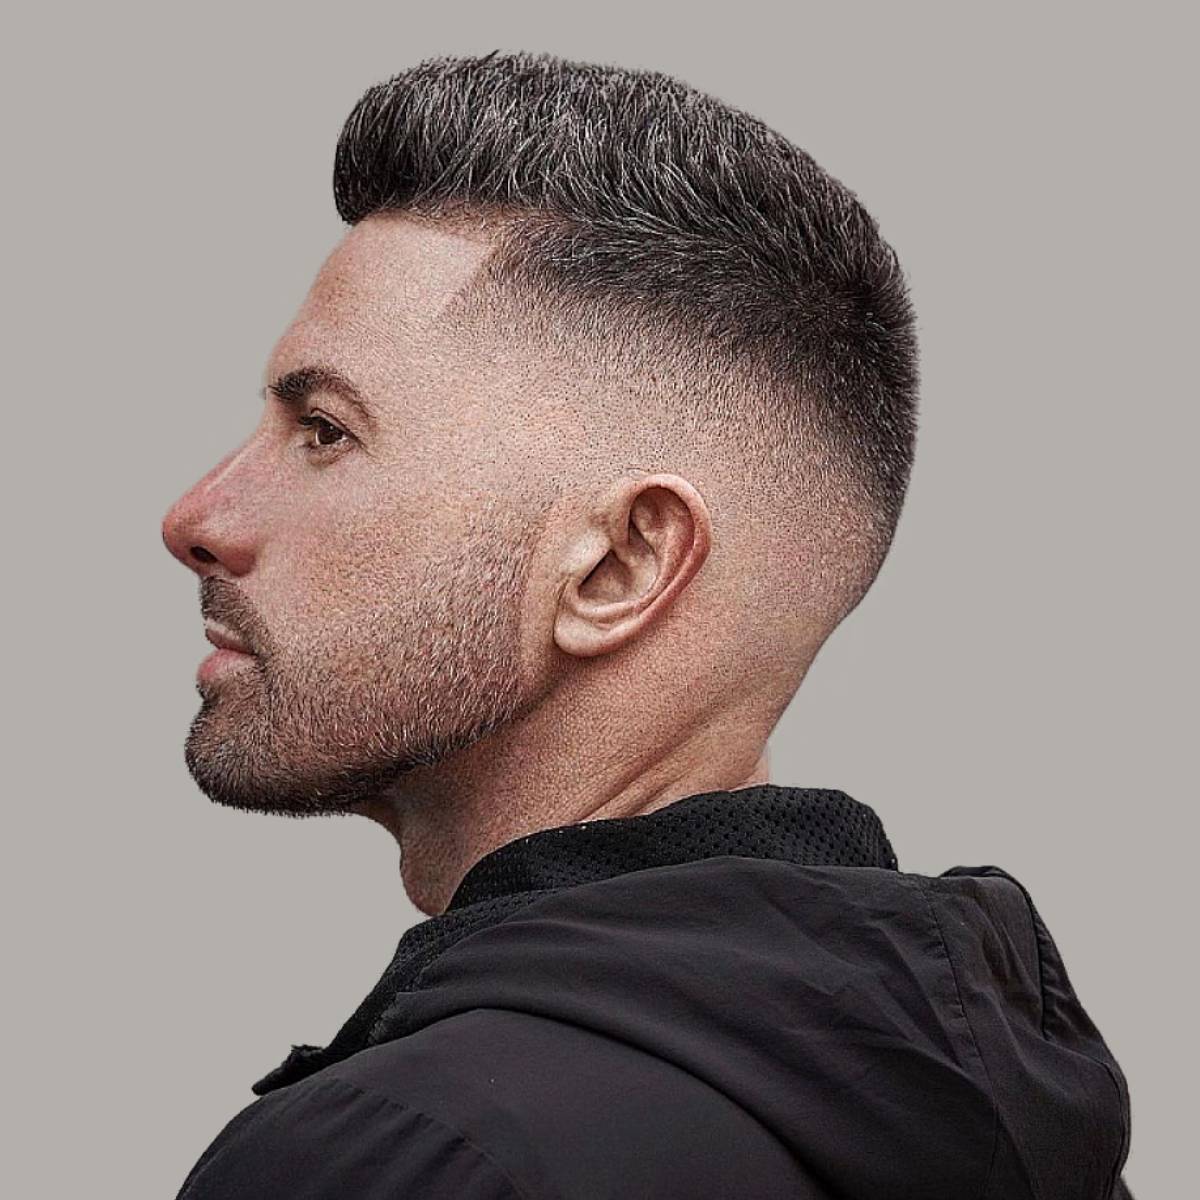 Top 100 Hairstyles And Haircuts For Men In 2023 | Trending hairstyles for  men, Haircuts for men, Men's short hair